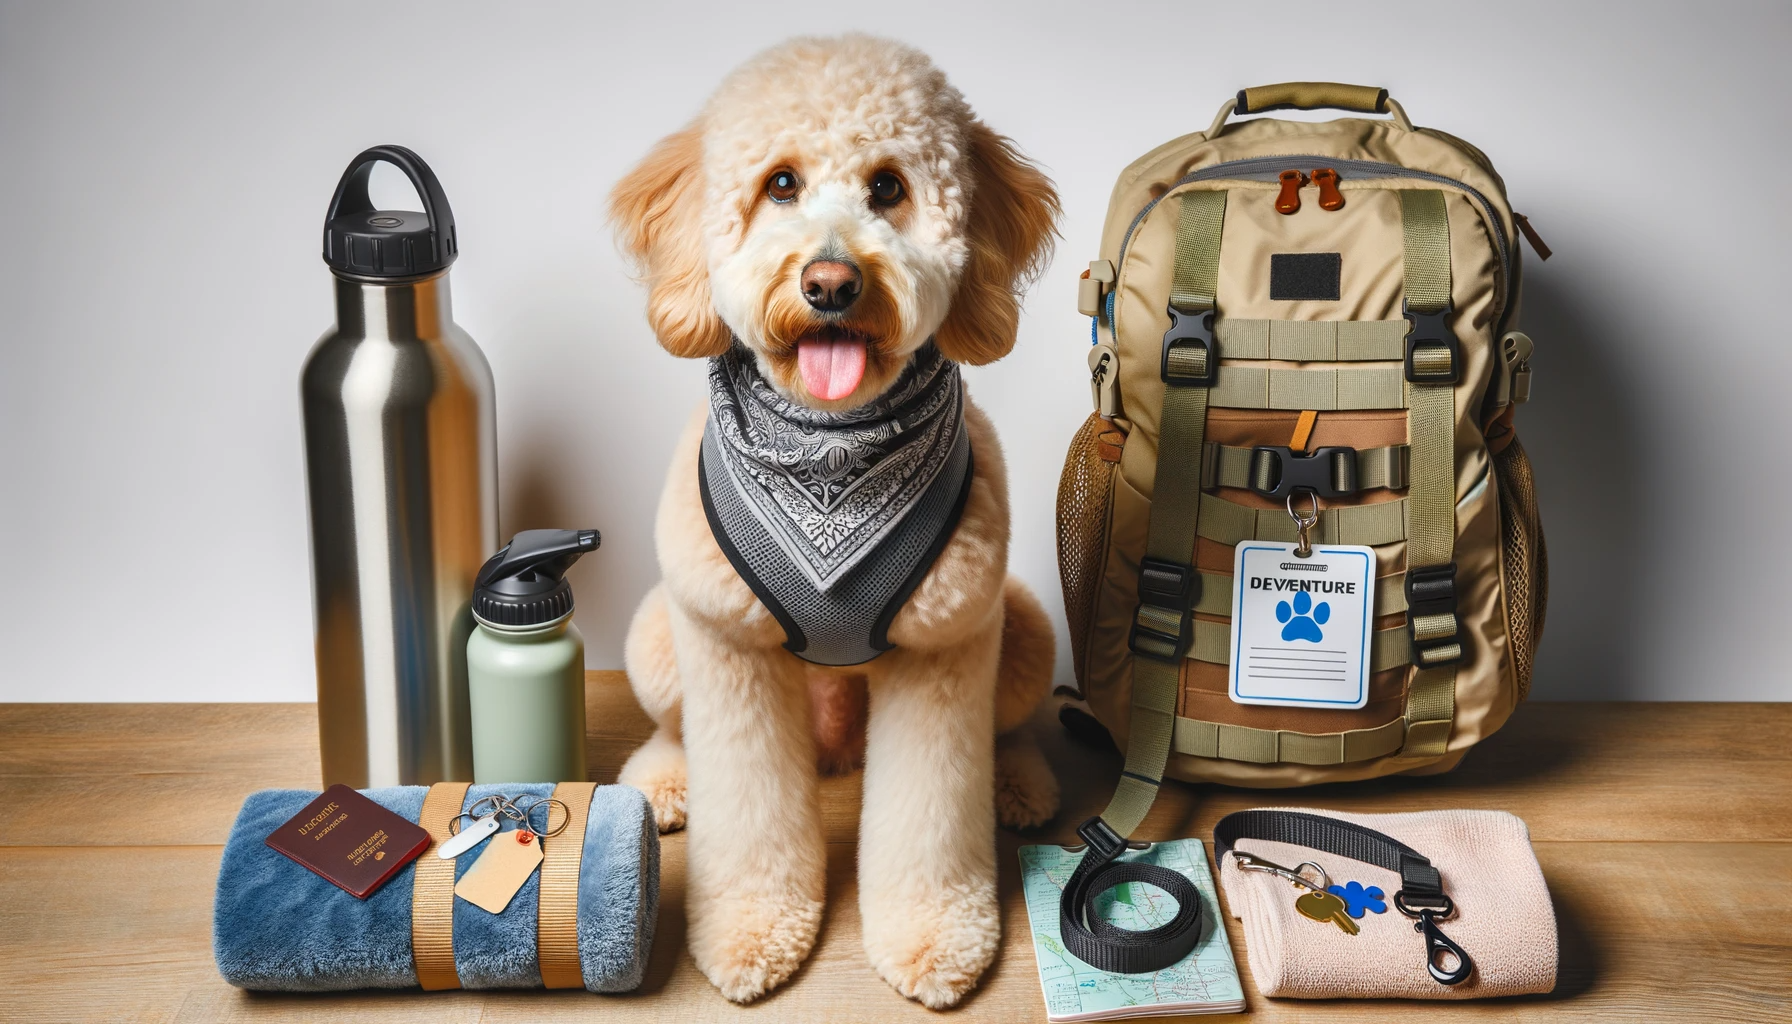 Photo of a Labradoodle geared up for an outdoor adventure. The dog wears a comfortable harness, a bandana, and is surrounded by travel essentials such as a water bottle, a leash, and identification tags, highlighting the additional costs associated with pet adventures.